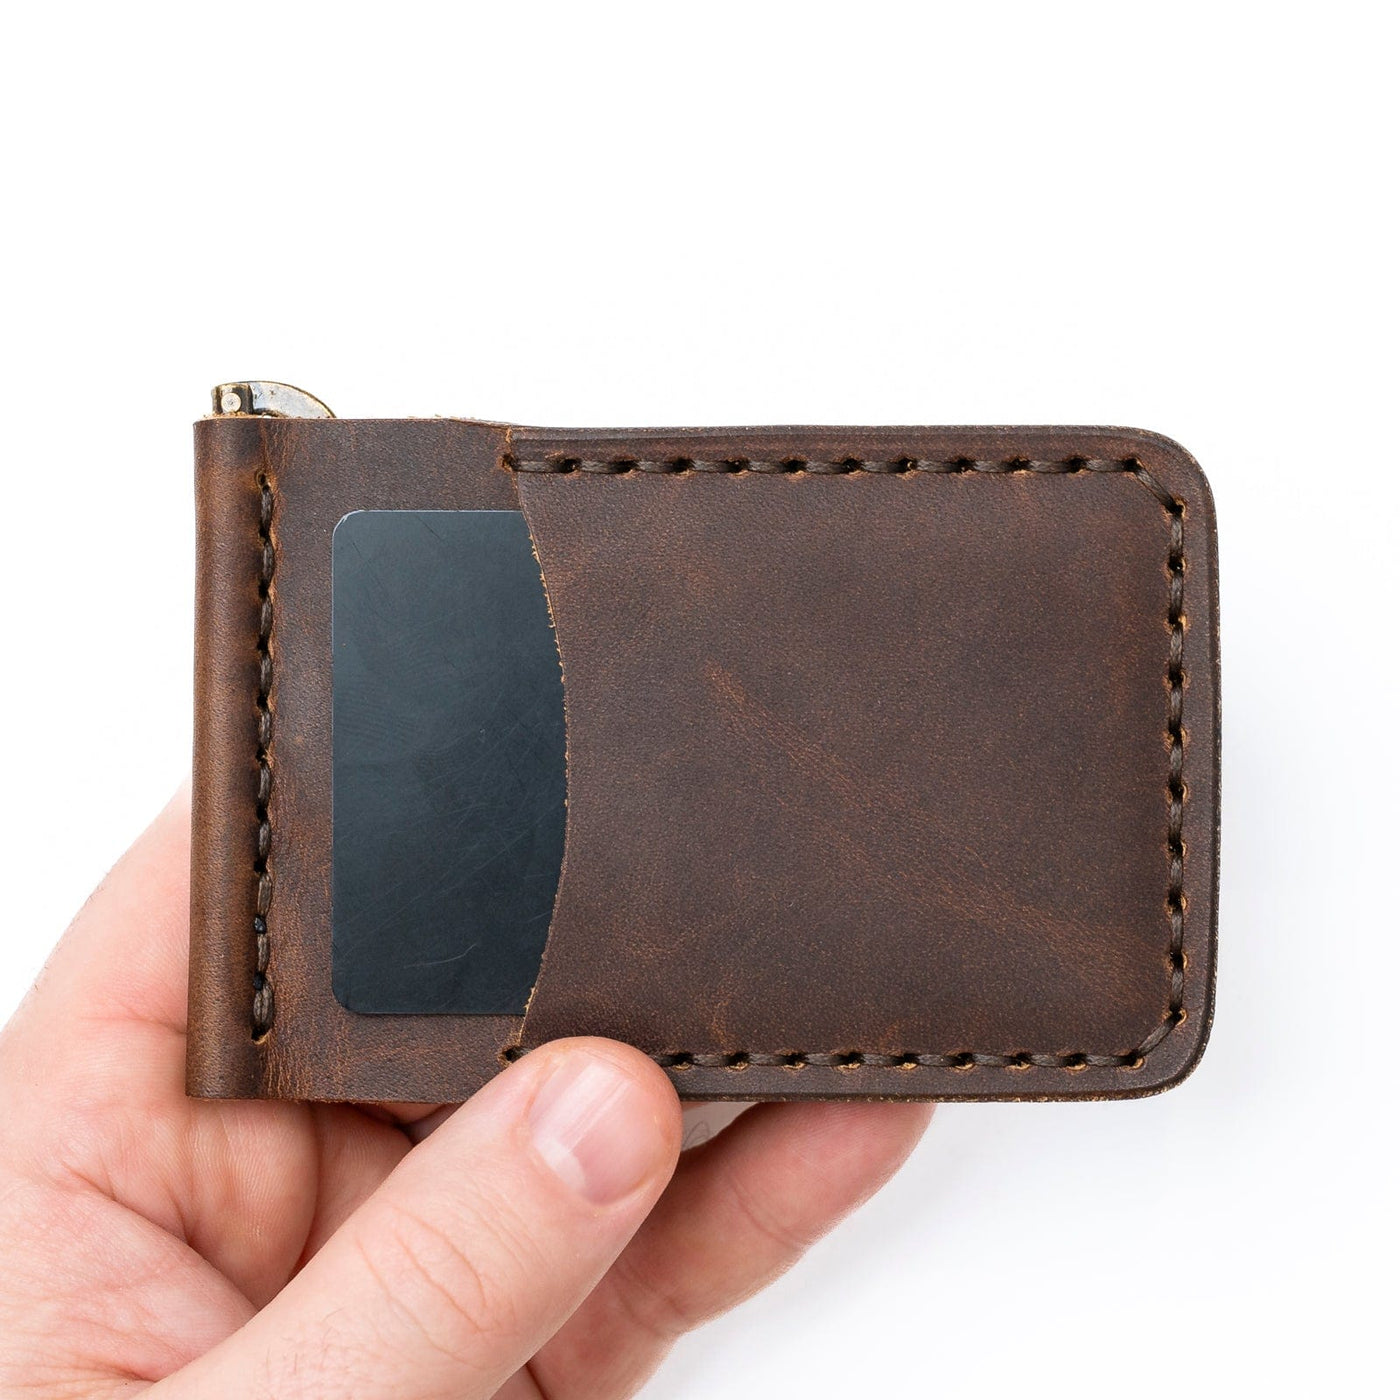 Leather Money Clip Wallet - Heritage Brown Popov Leather